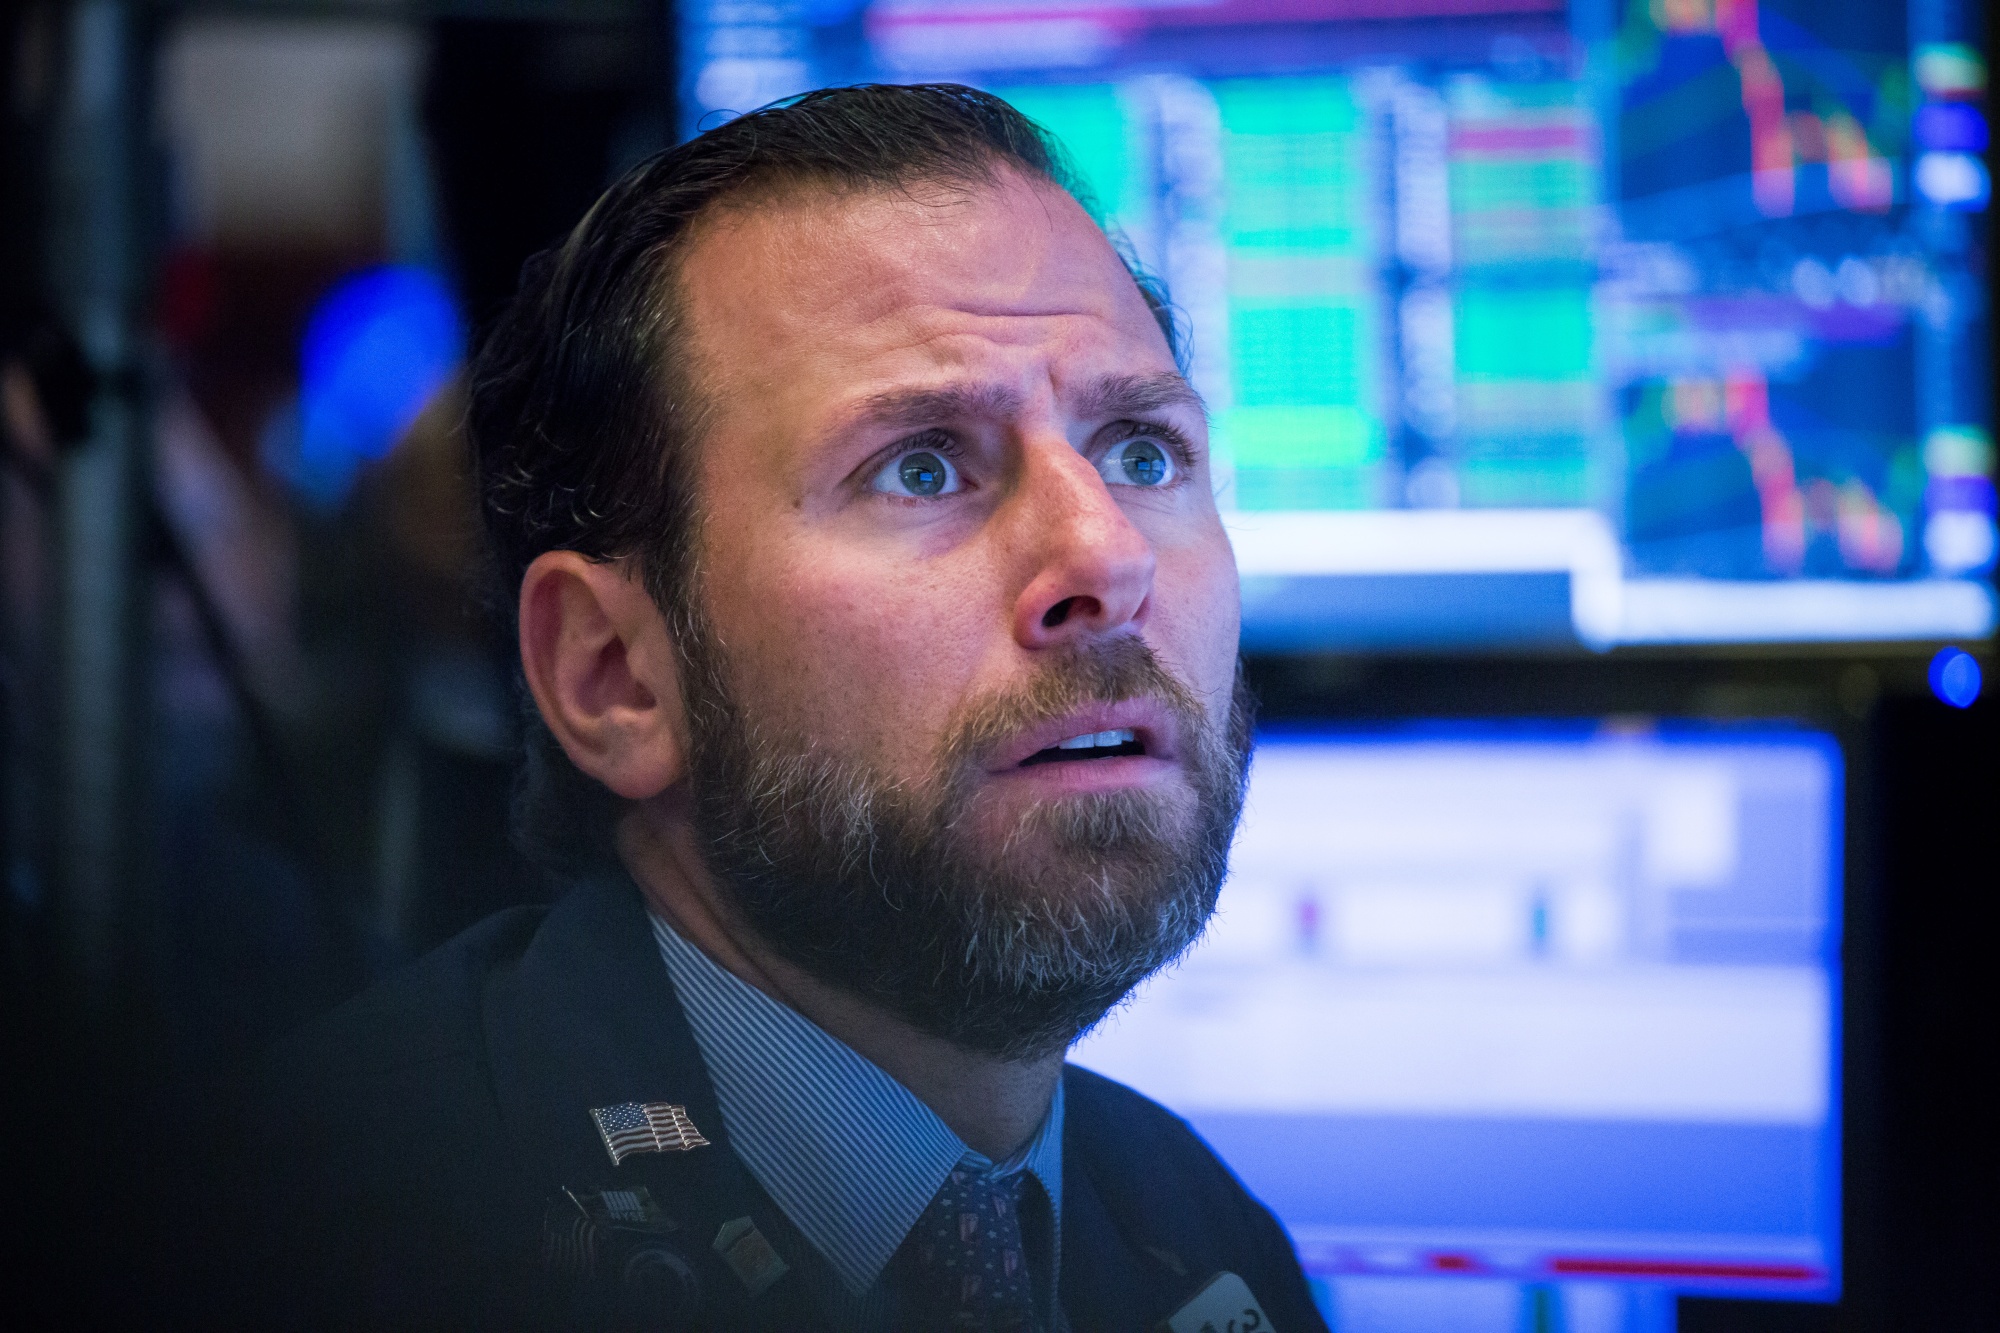 It’s one of the worst weeks for stocks since the financial crisis.&nbsp;